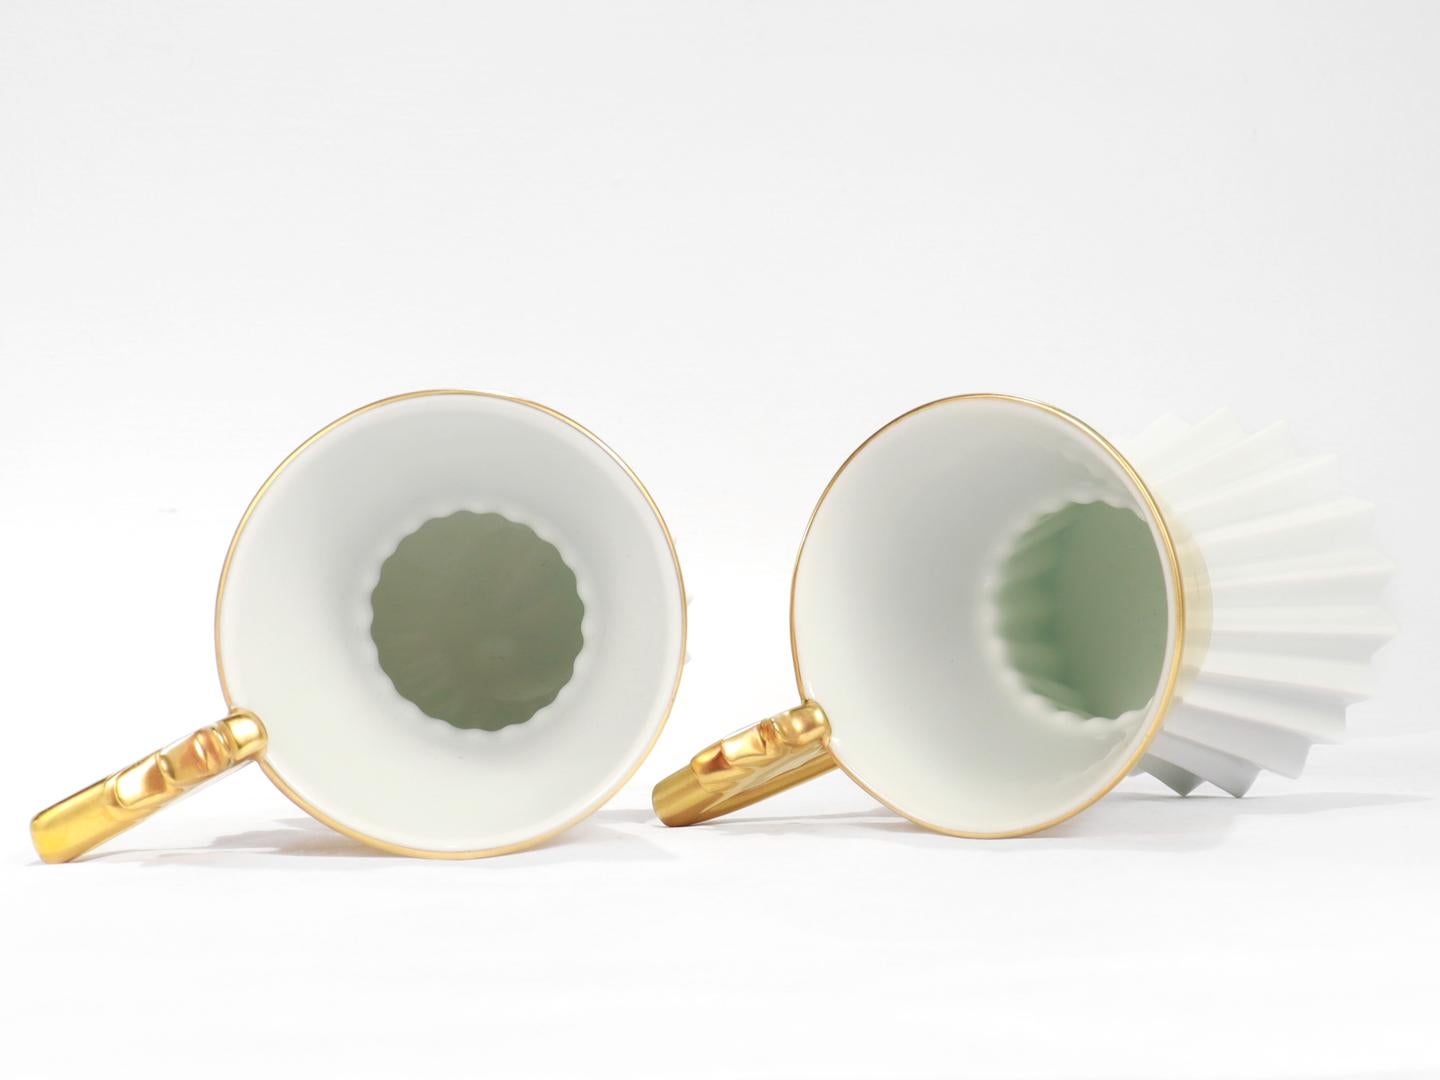 Pair of Rosenthal Studio Linie Gilt Porcelain No. 23 Cup & Saucers by Otto Piene For Sale 1